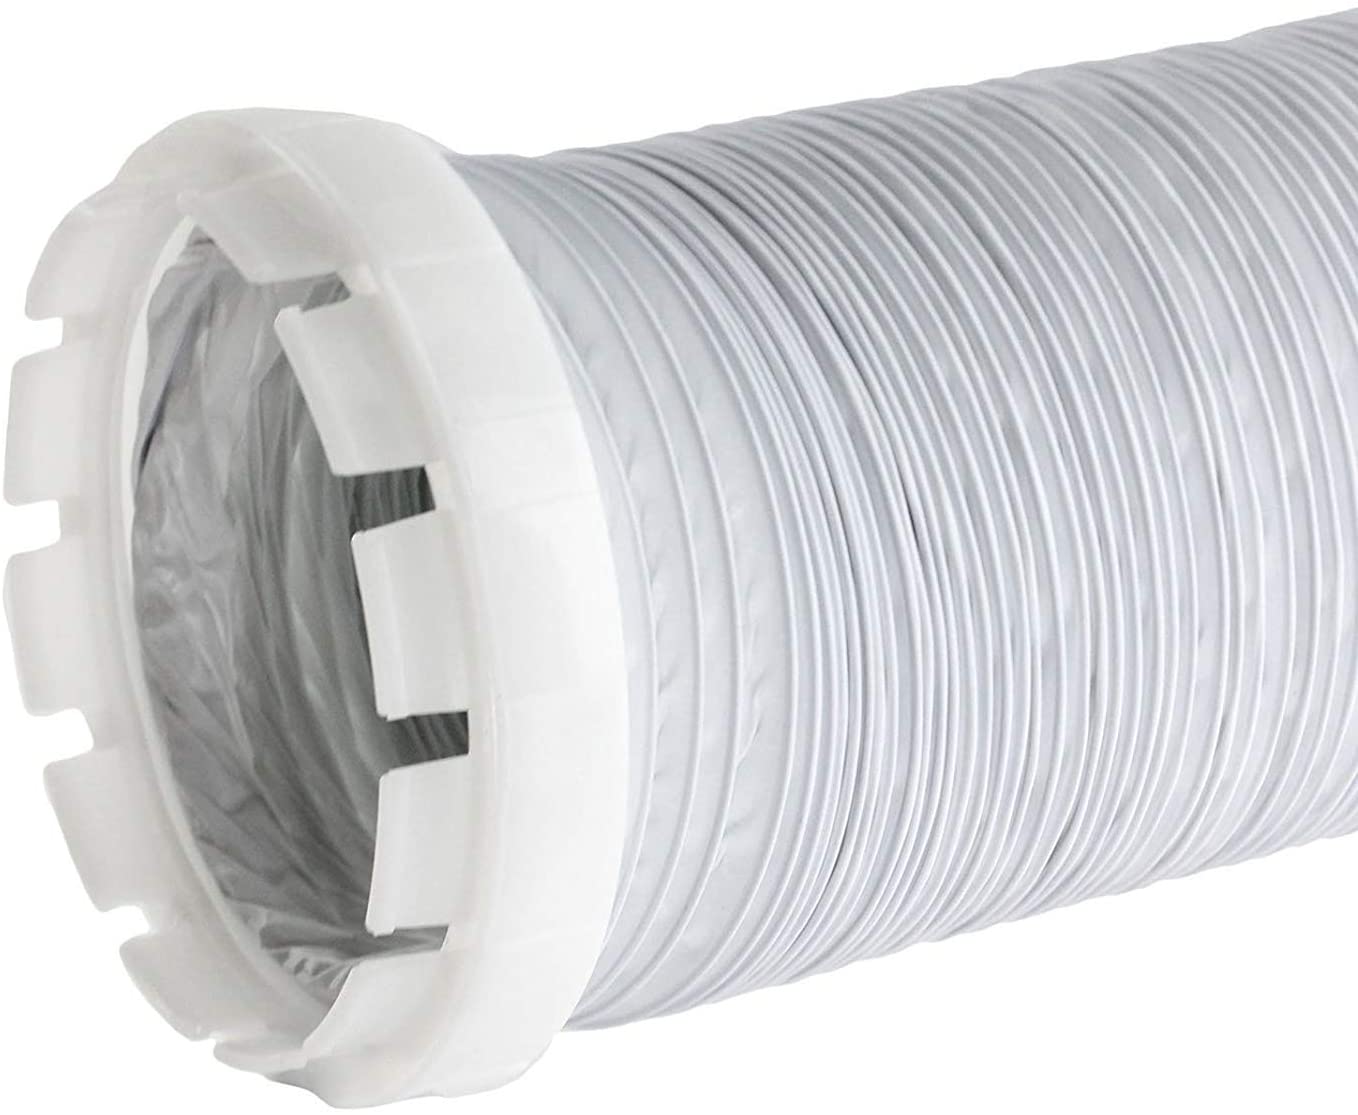 4m Vent Hose + Adapter for Indesit Tumble Dryer